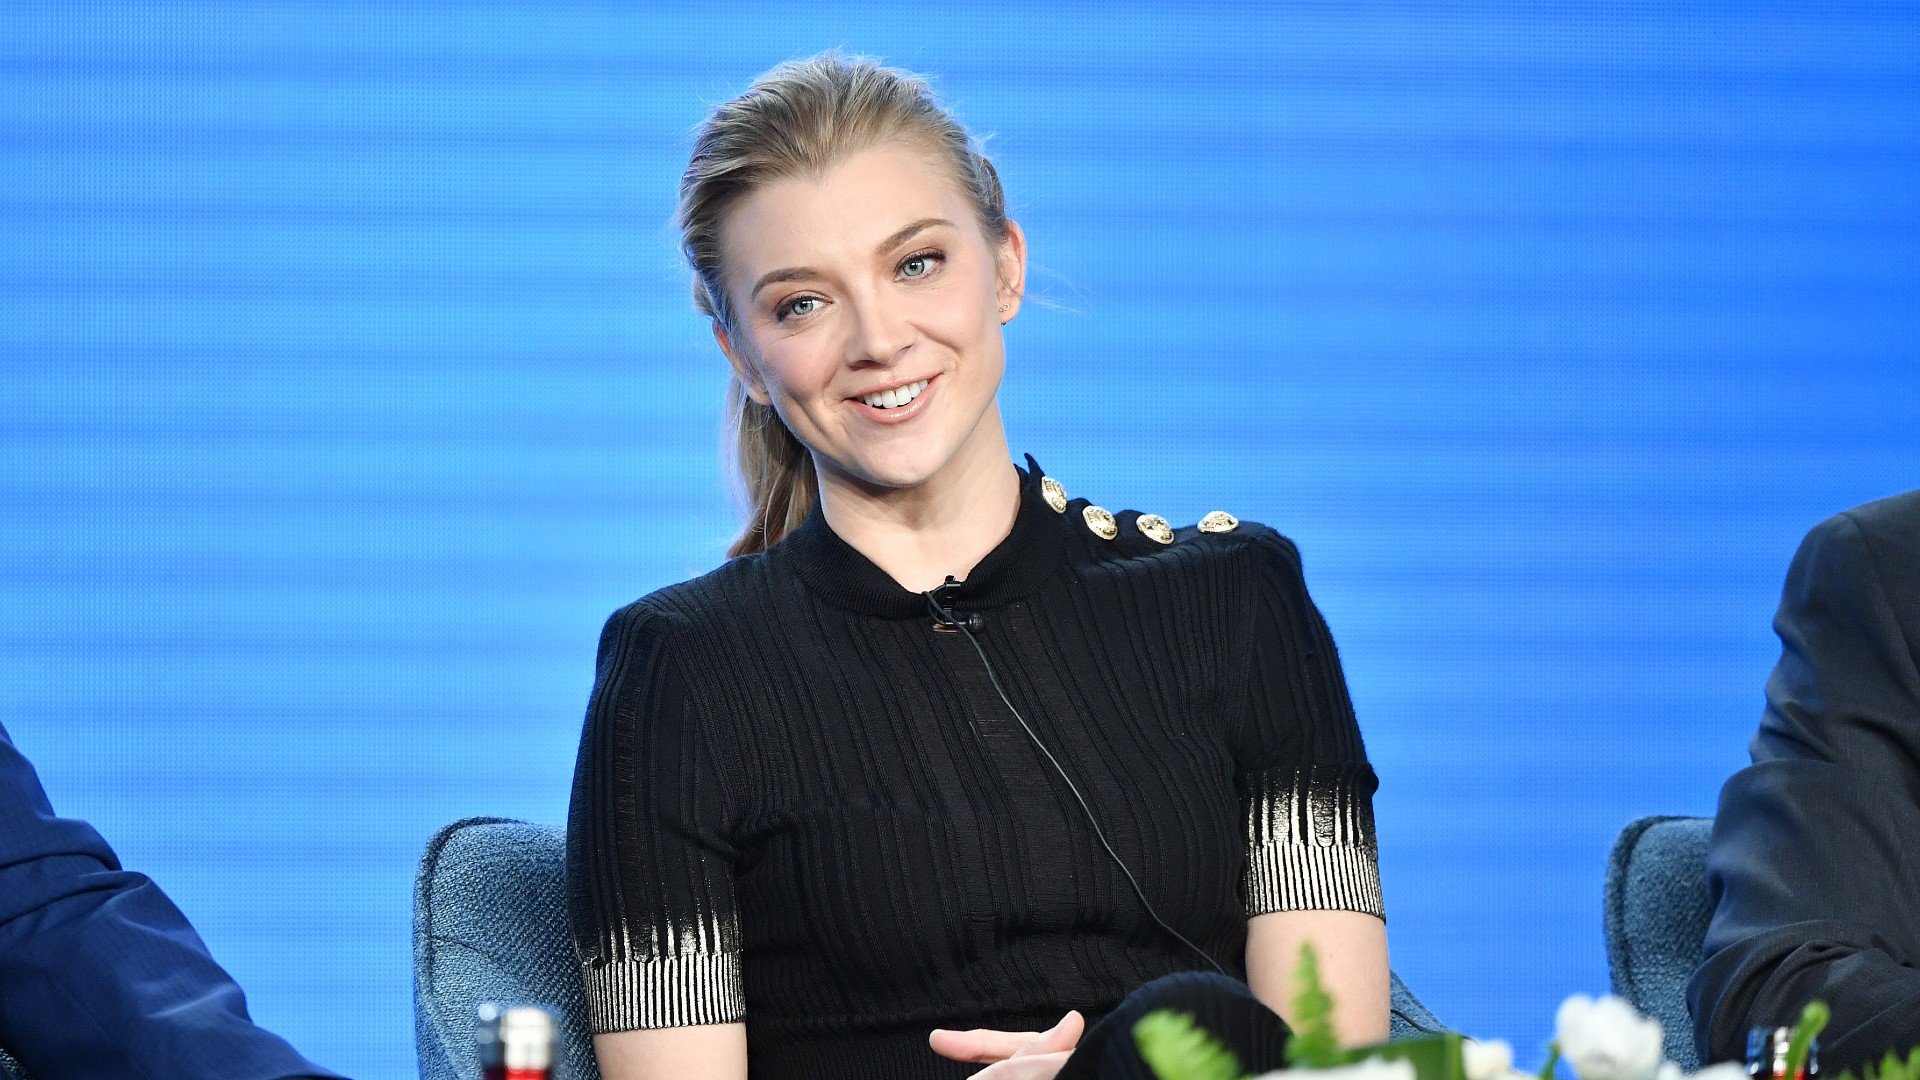 Casting News: Natalie Dormer to Play Pioneering Oncologist Audrey Evans in Biopic 'Audrey's Children'